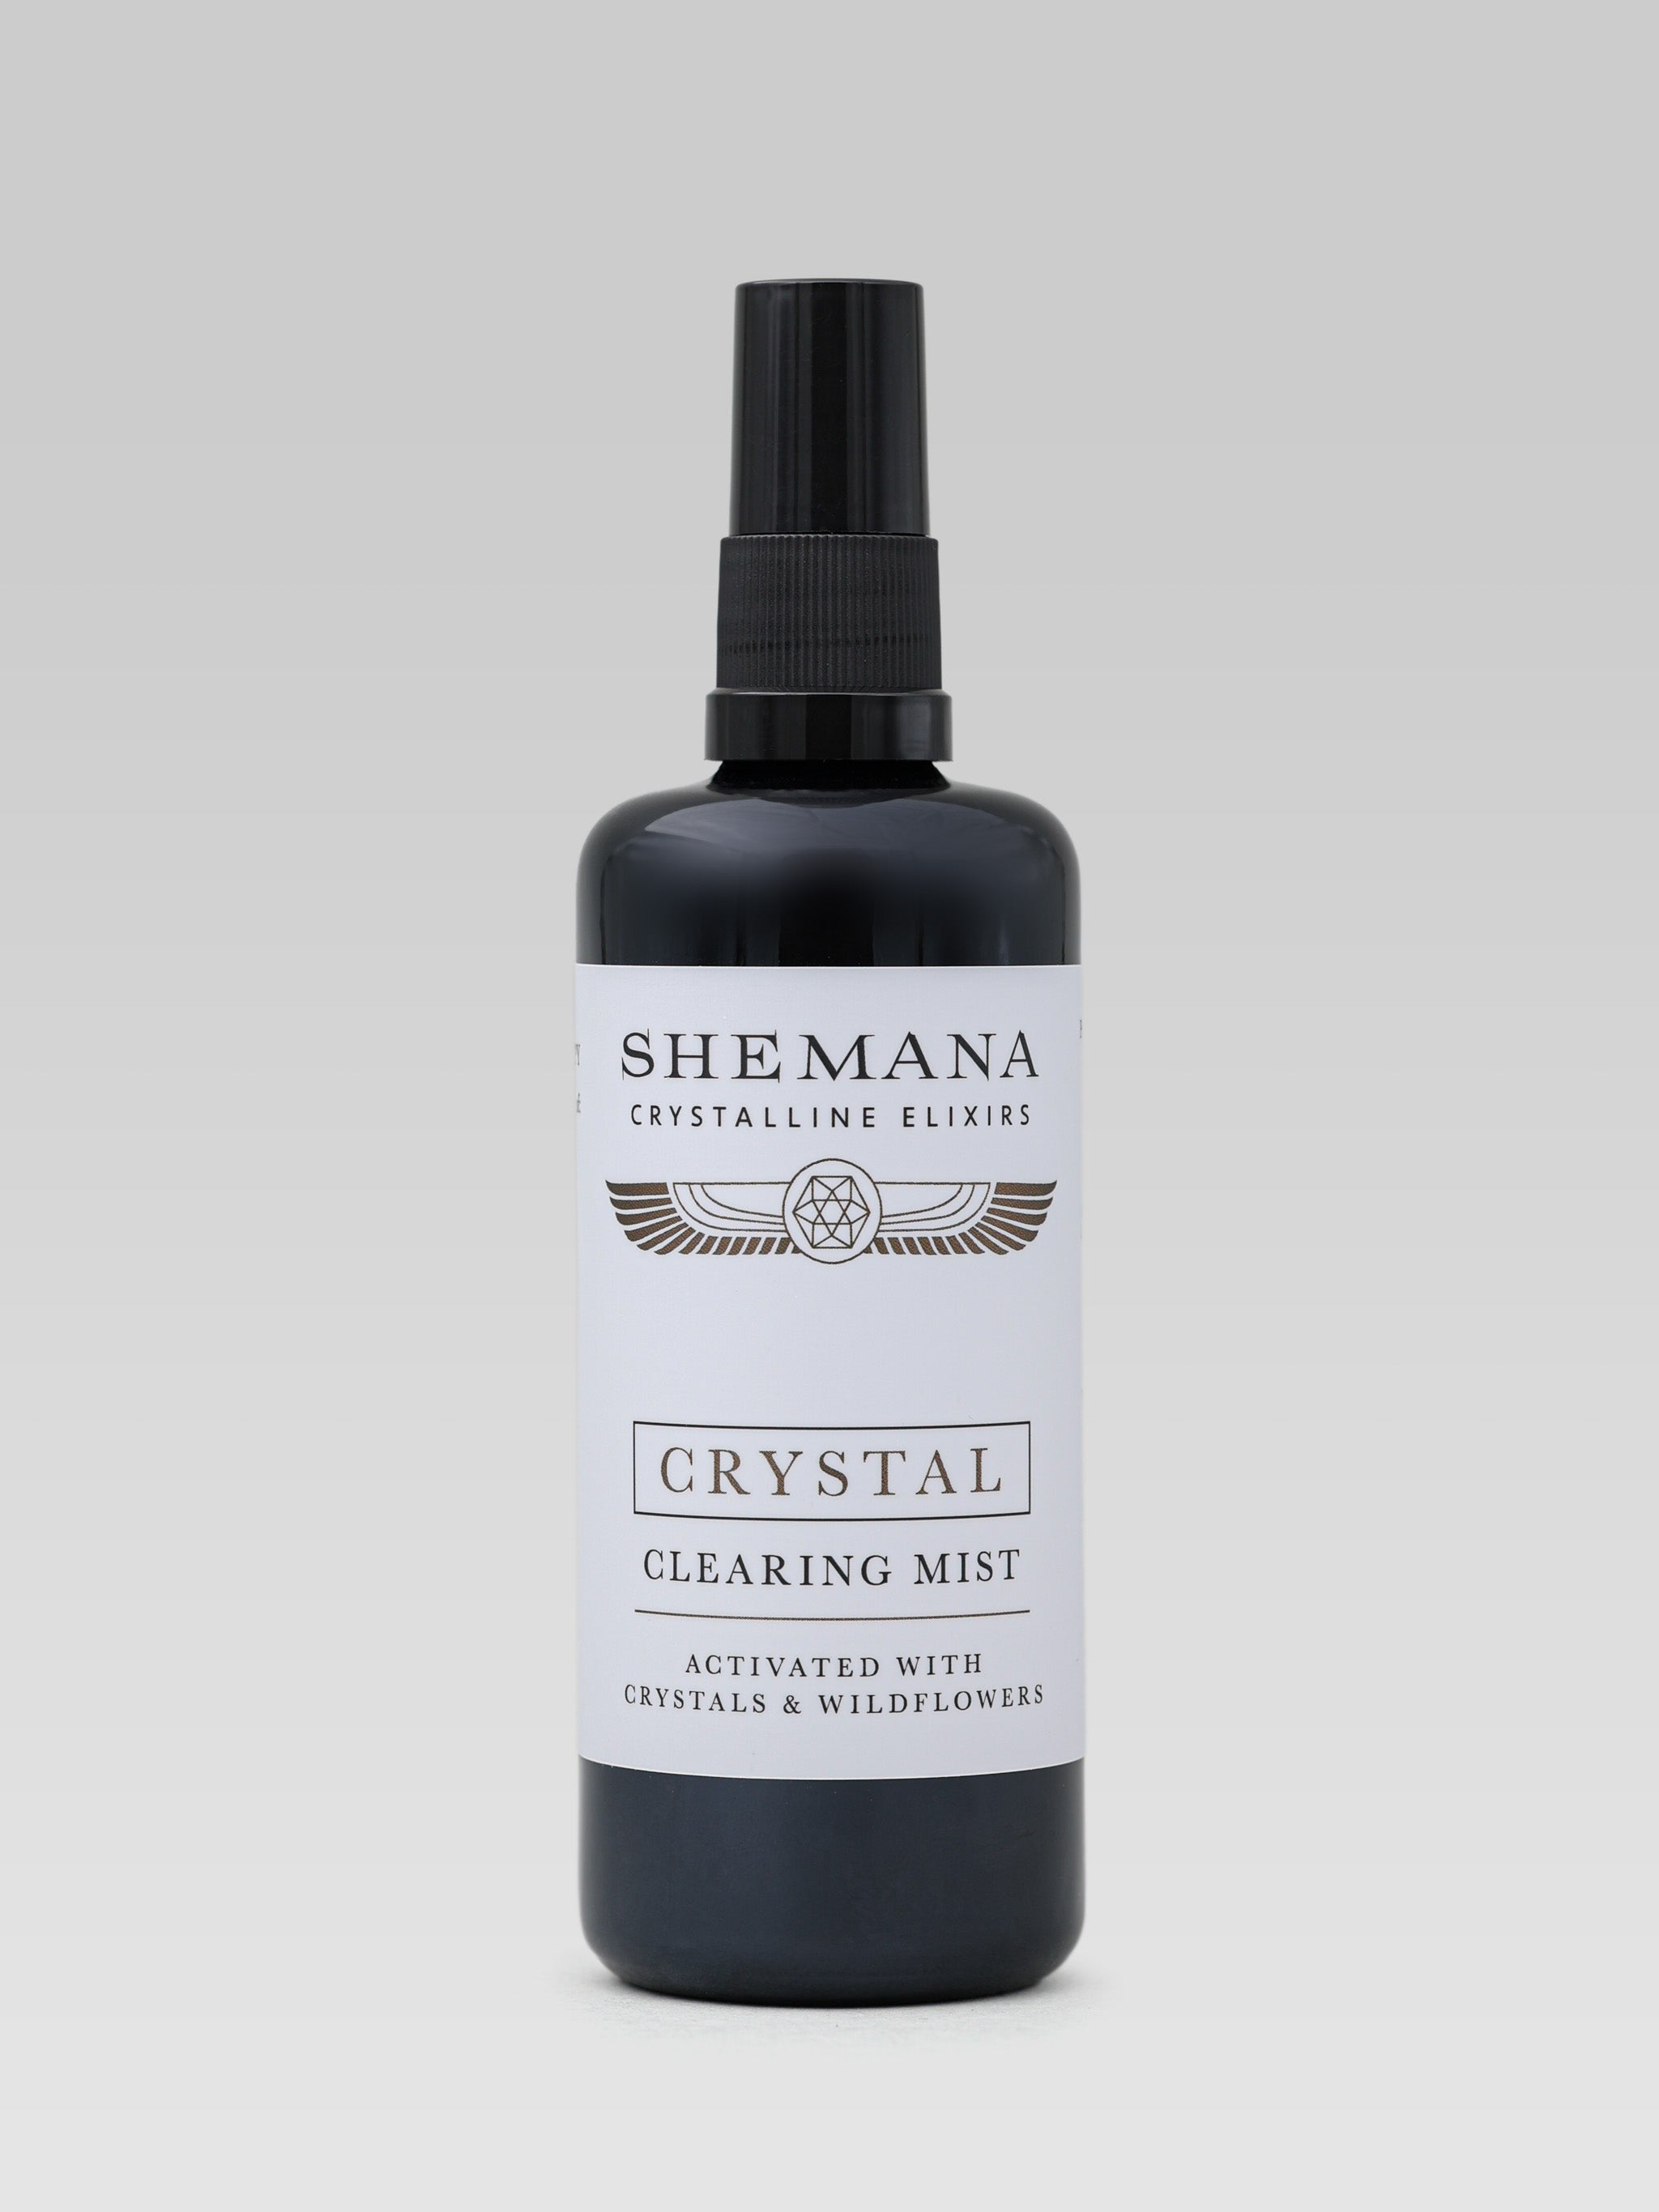 Shemana Crystal Cleating Mist product shot 